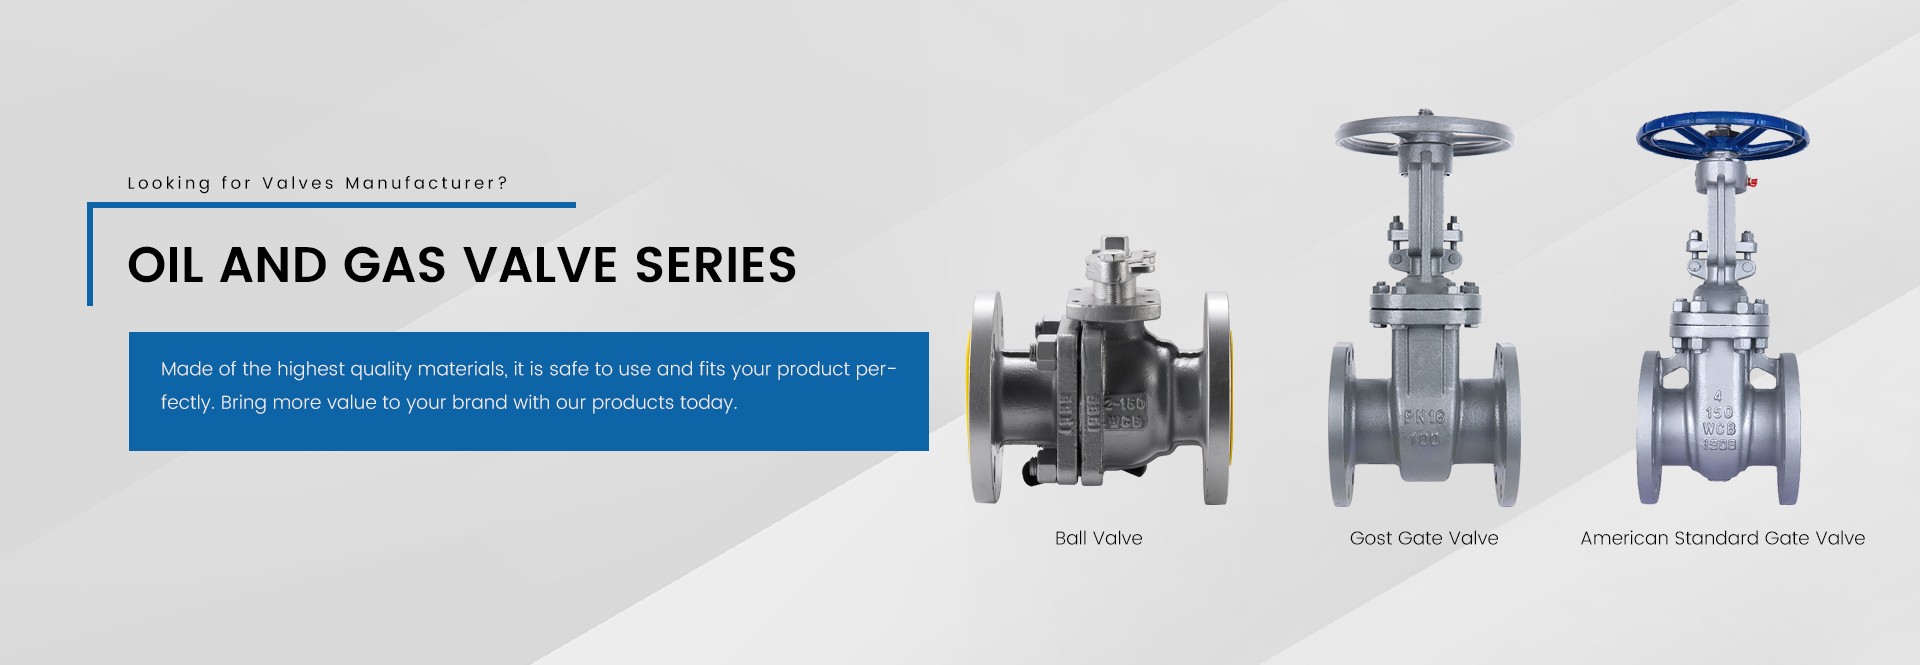 Oil and gas valve series